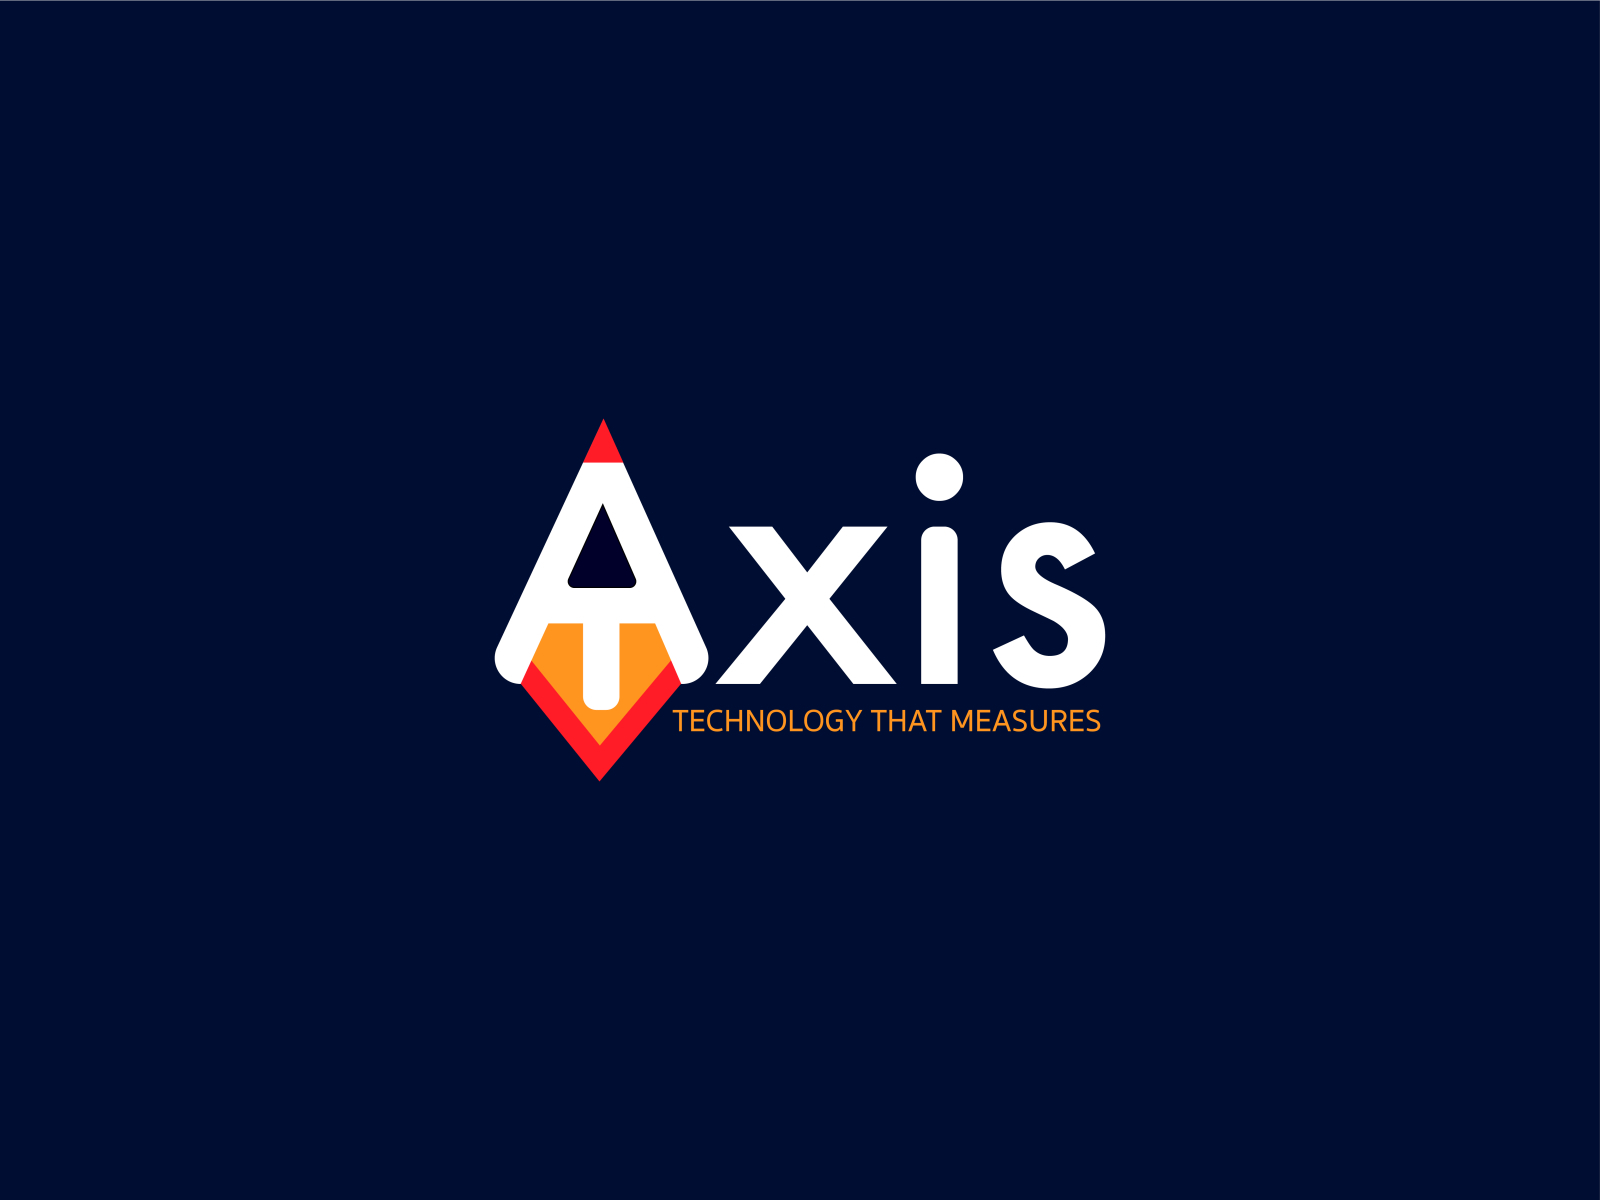 Axis technology logo design by Daisy on Dribbble